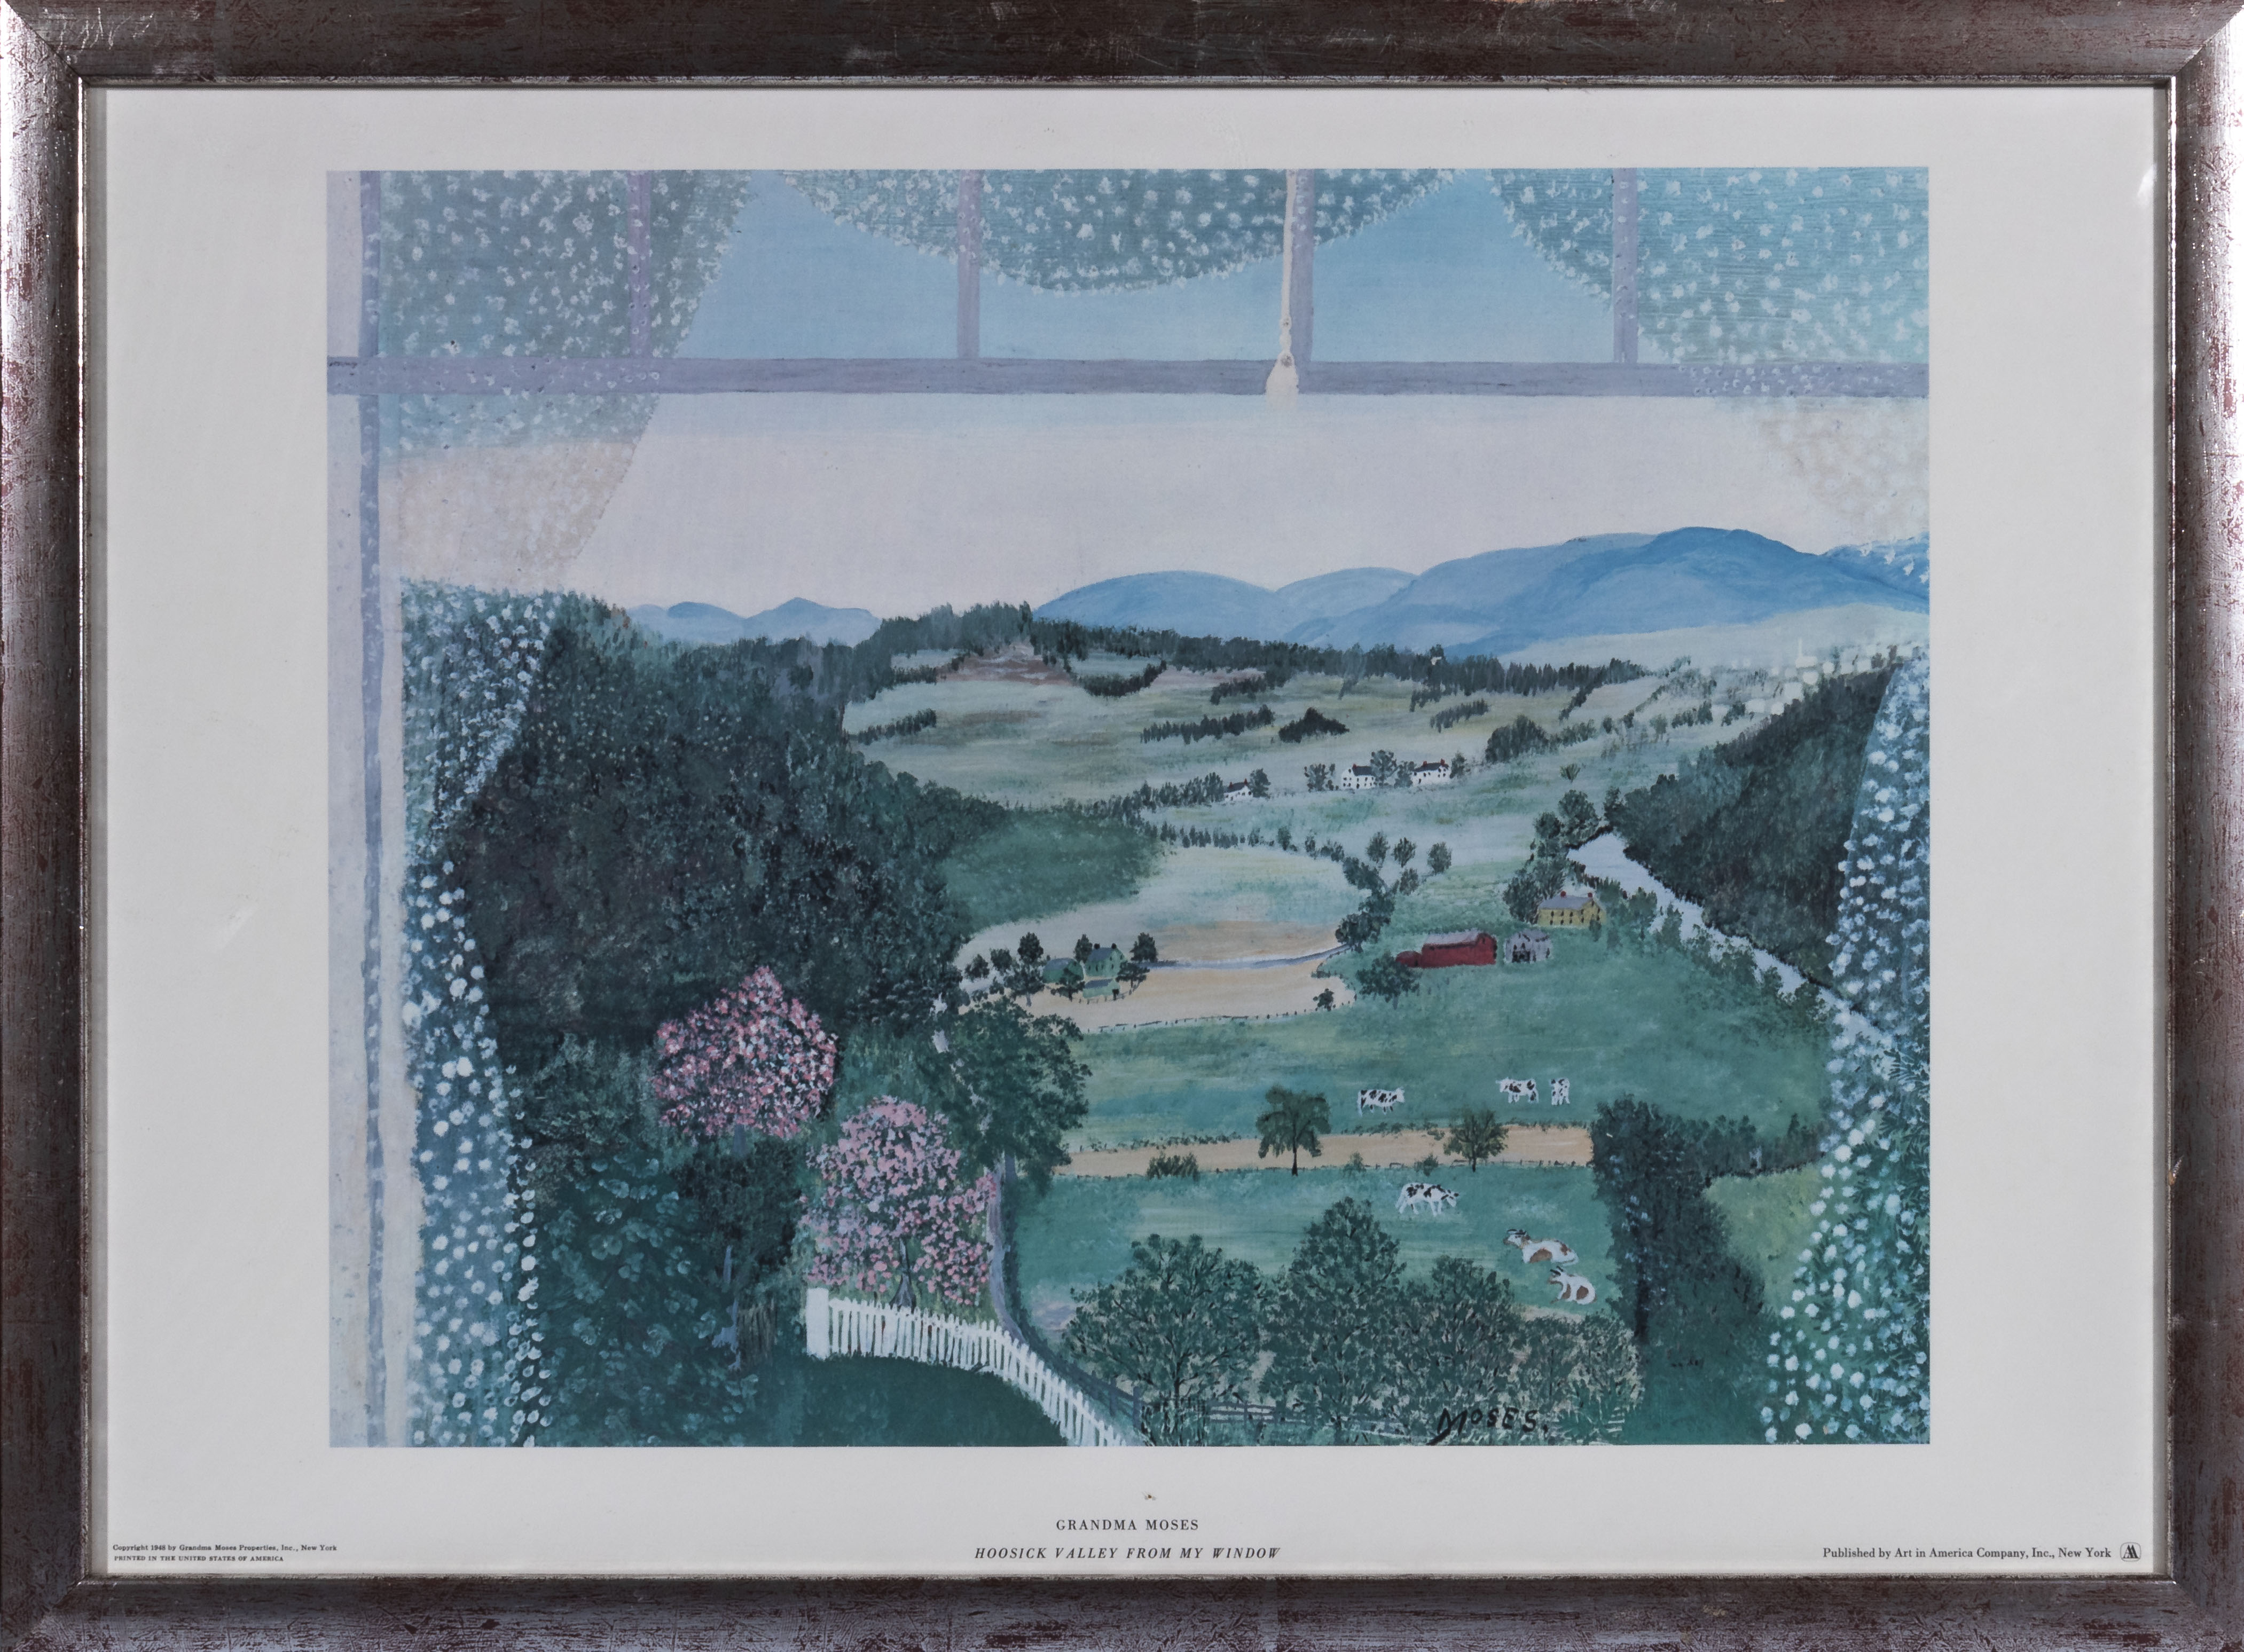 A Grandma Moses print titled Hoosick Valley through my Window image size 30cm x 38cm, together - Image 3 of 4